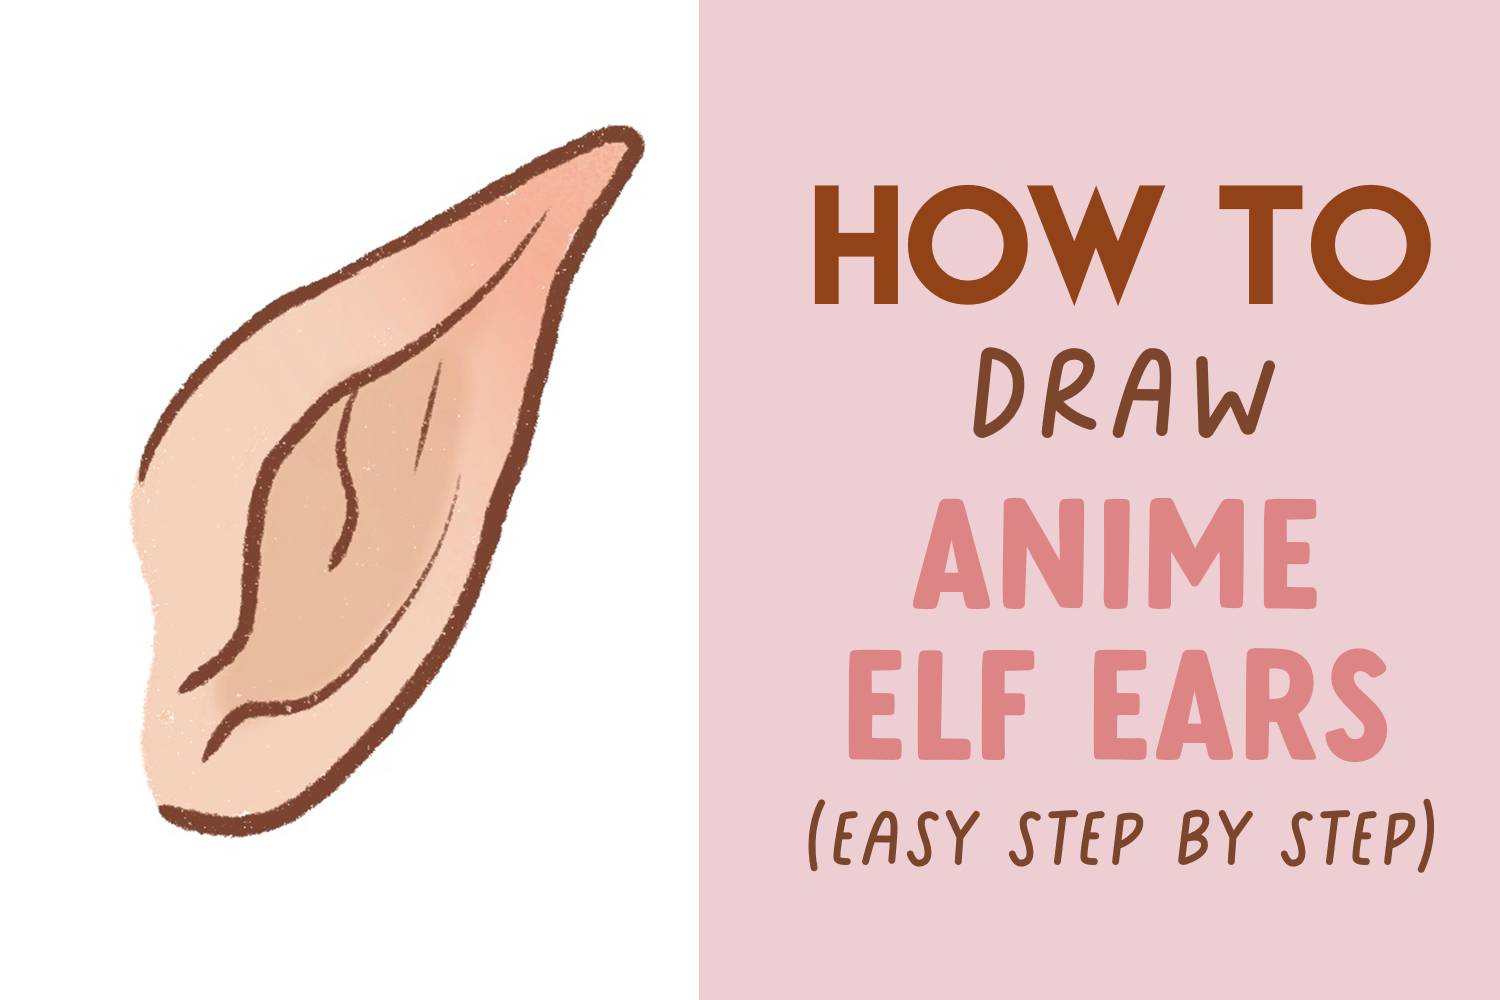 How to Draw Anime Elf Ears (Step by Step)